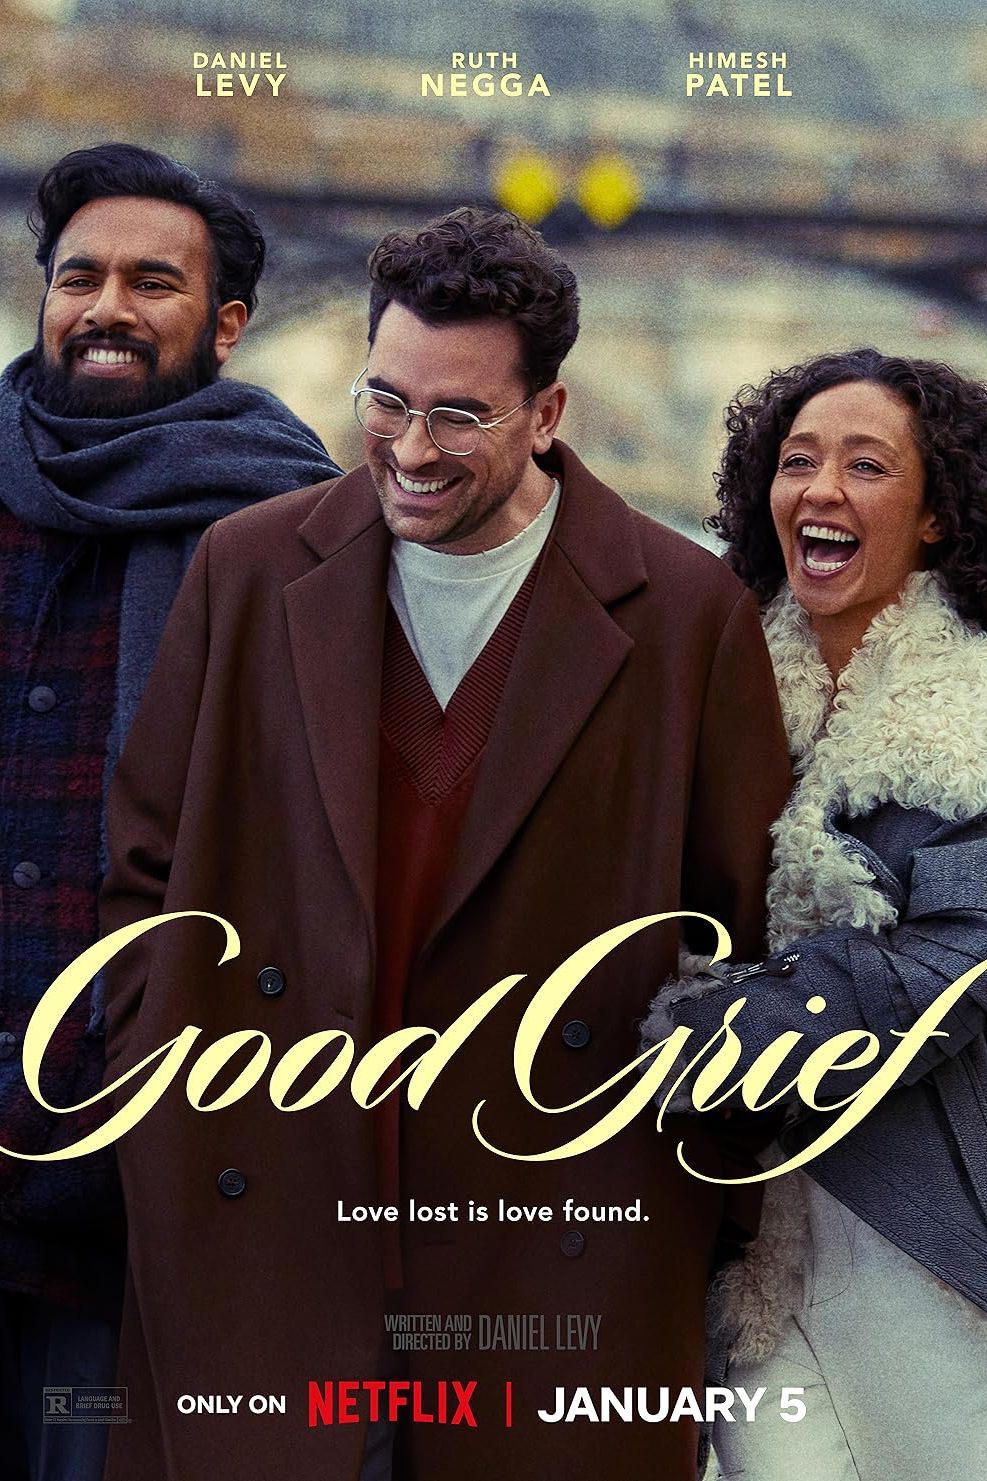 Good Grief Review: Dan Levy’s Directorial Debut Is A Mixed Bag